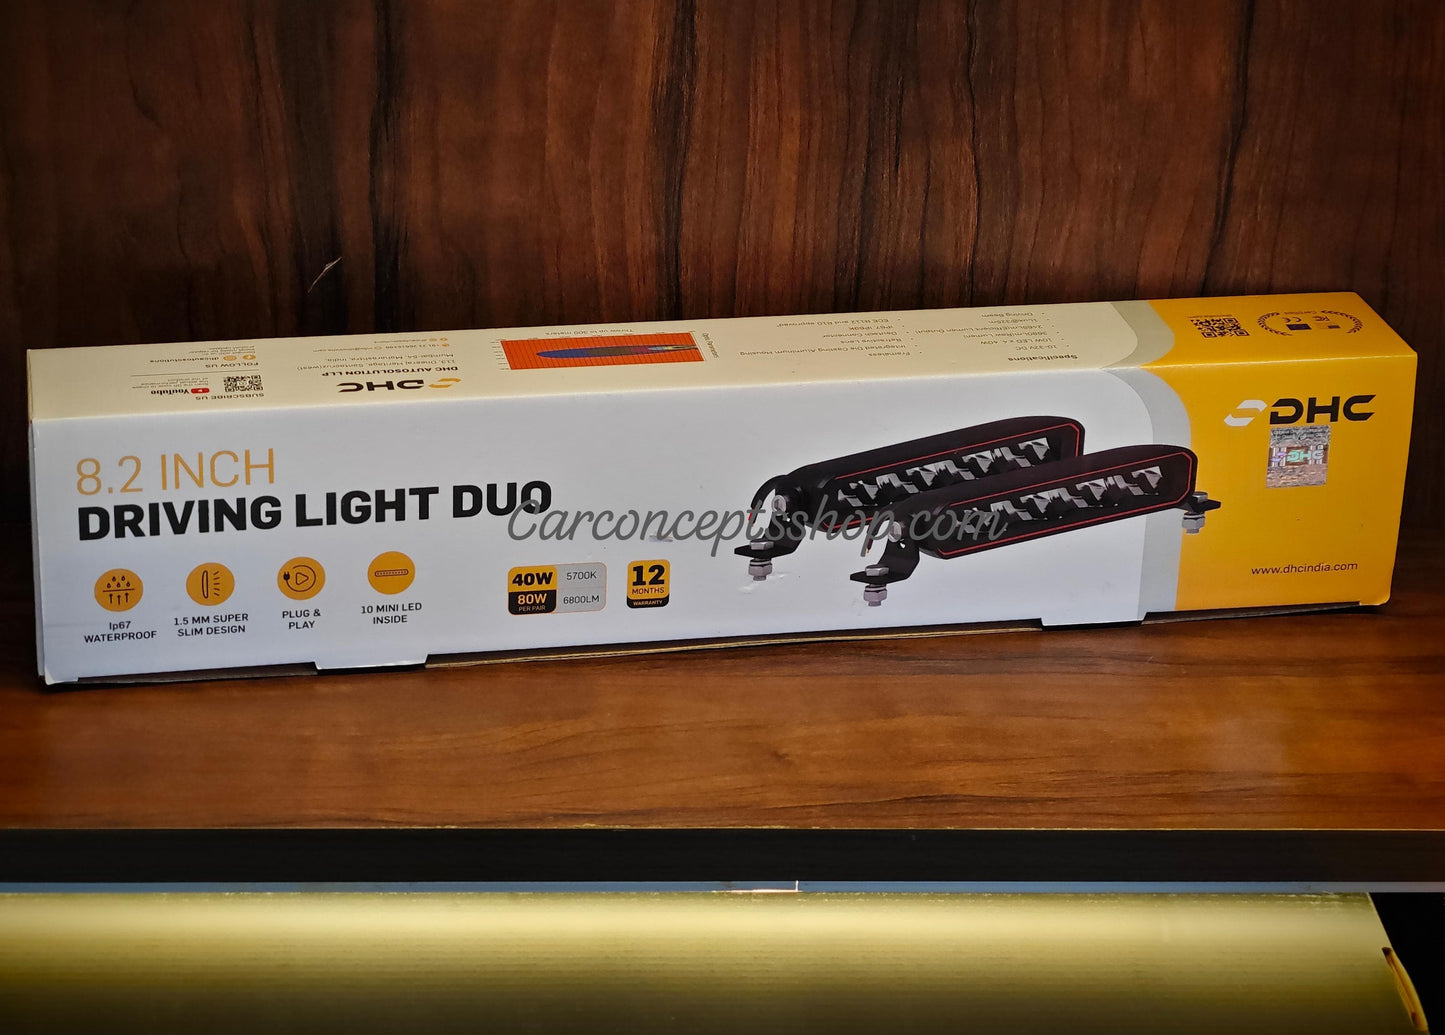 Dhc 8.2 inch driving light duo off roading lights for all cars